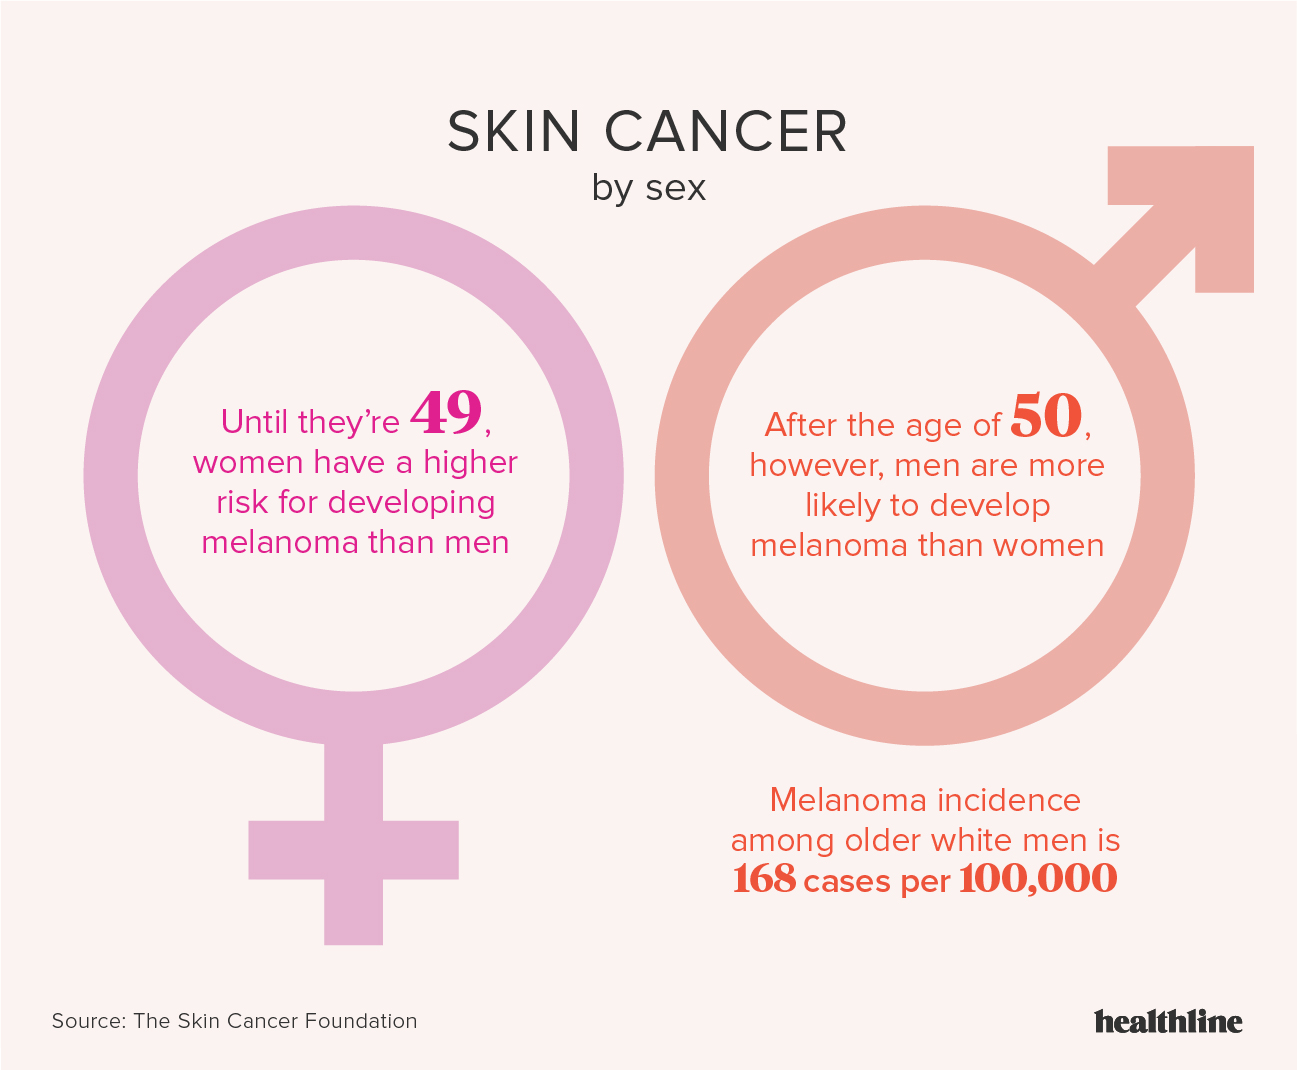 Important Facts About Skin Cancer Prevention That You Should Know